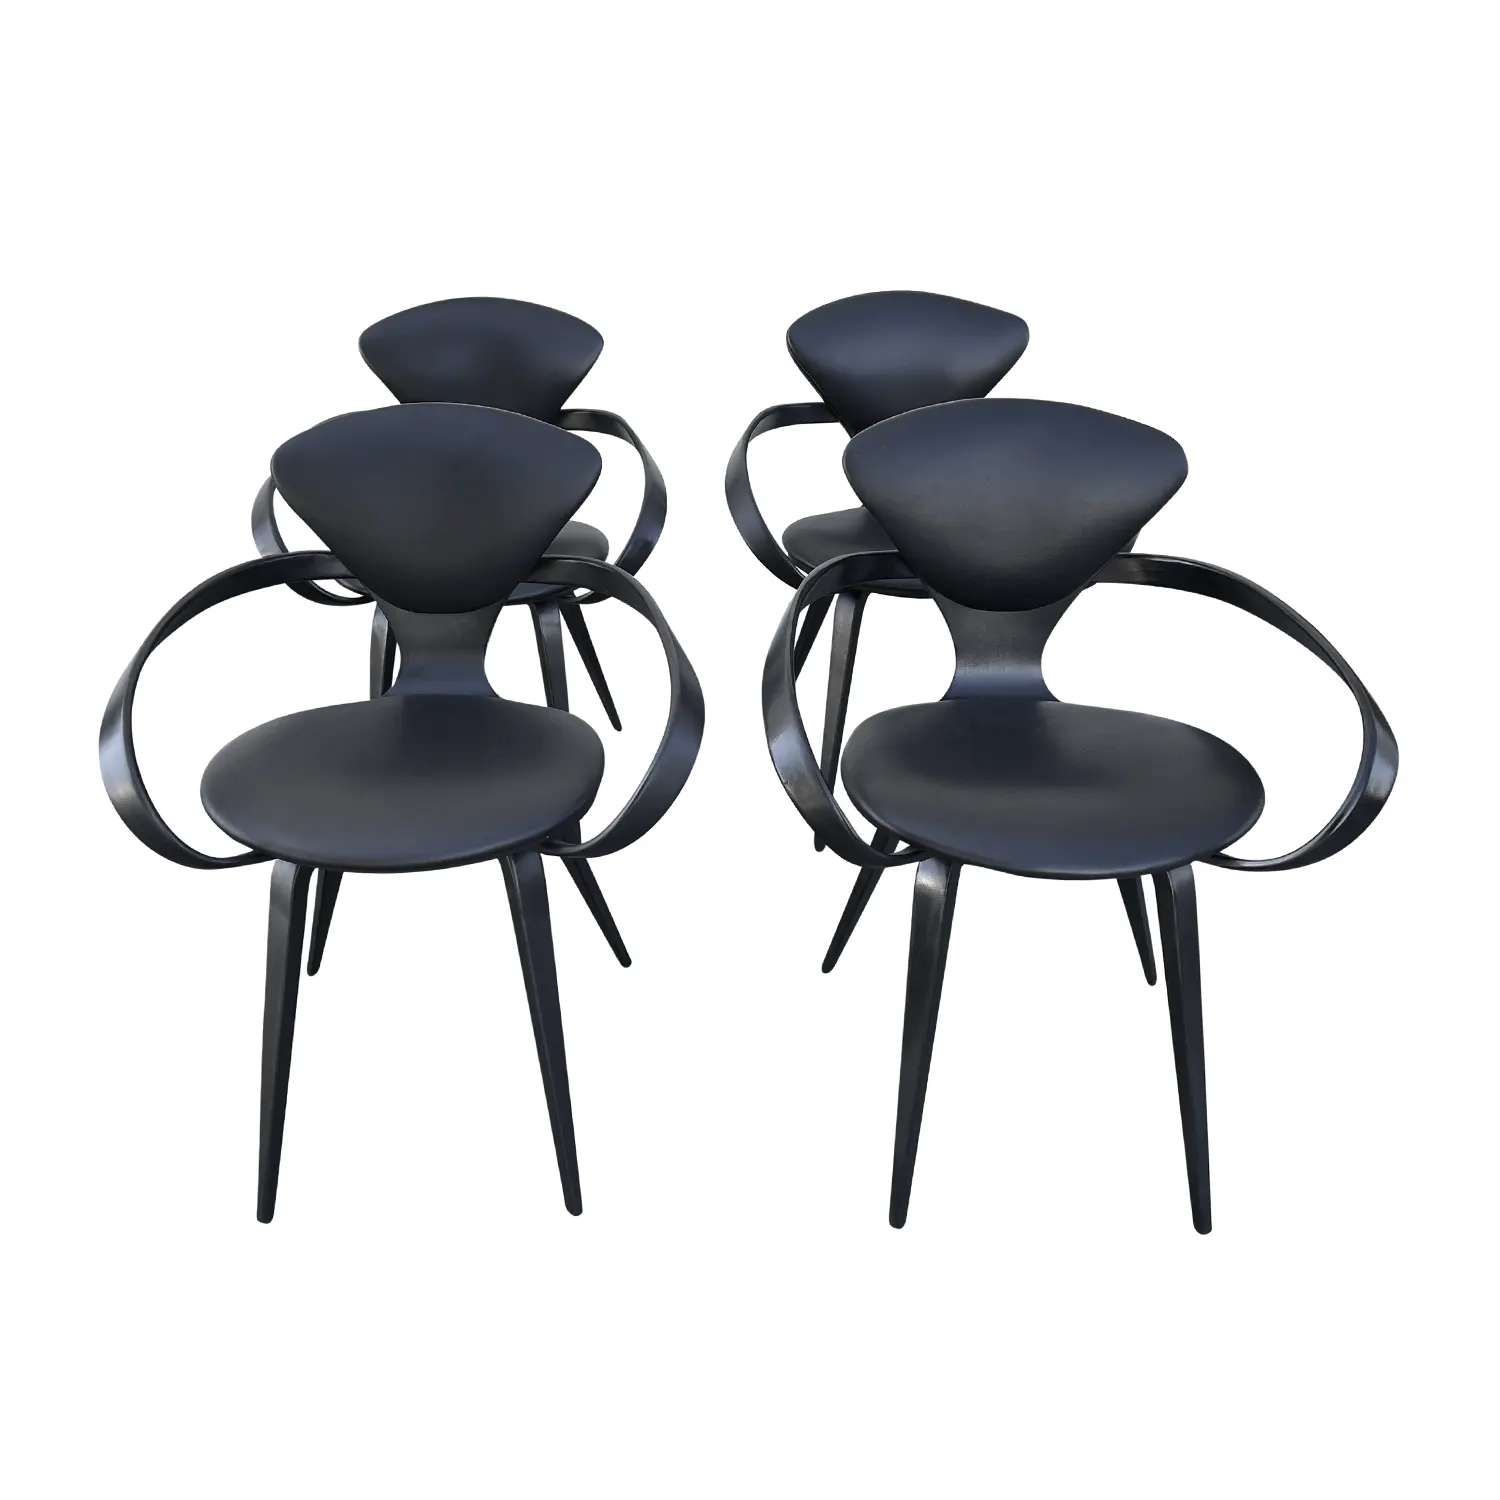 20th Century American Plycraft Set of Four Black Dining Chairs by Norman Cherner